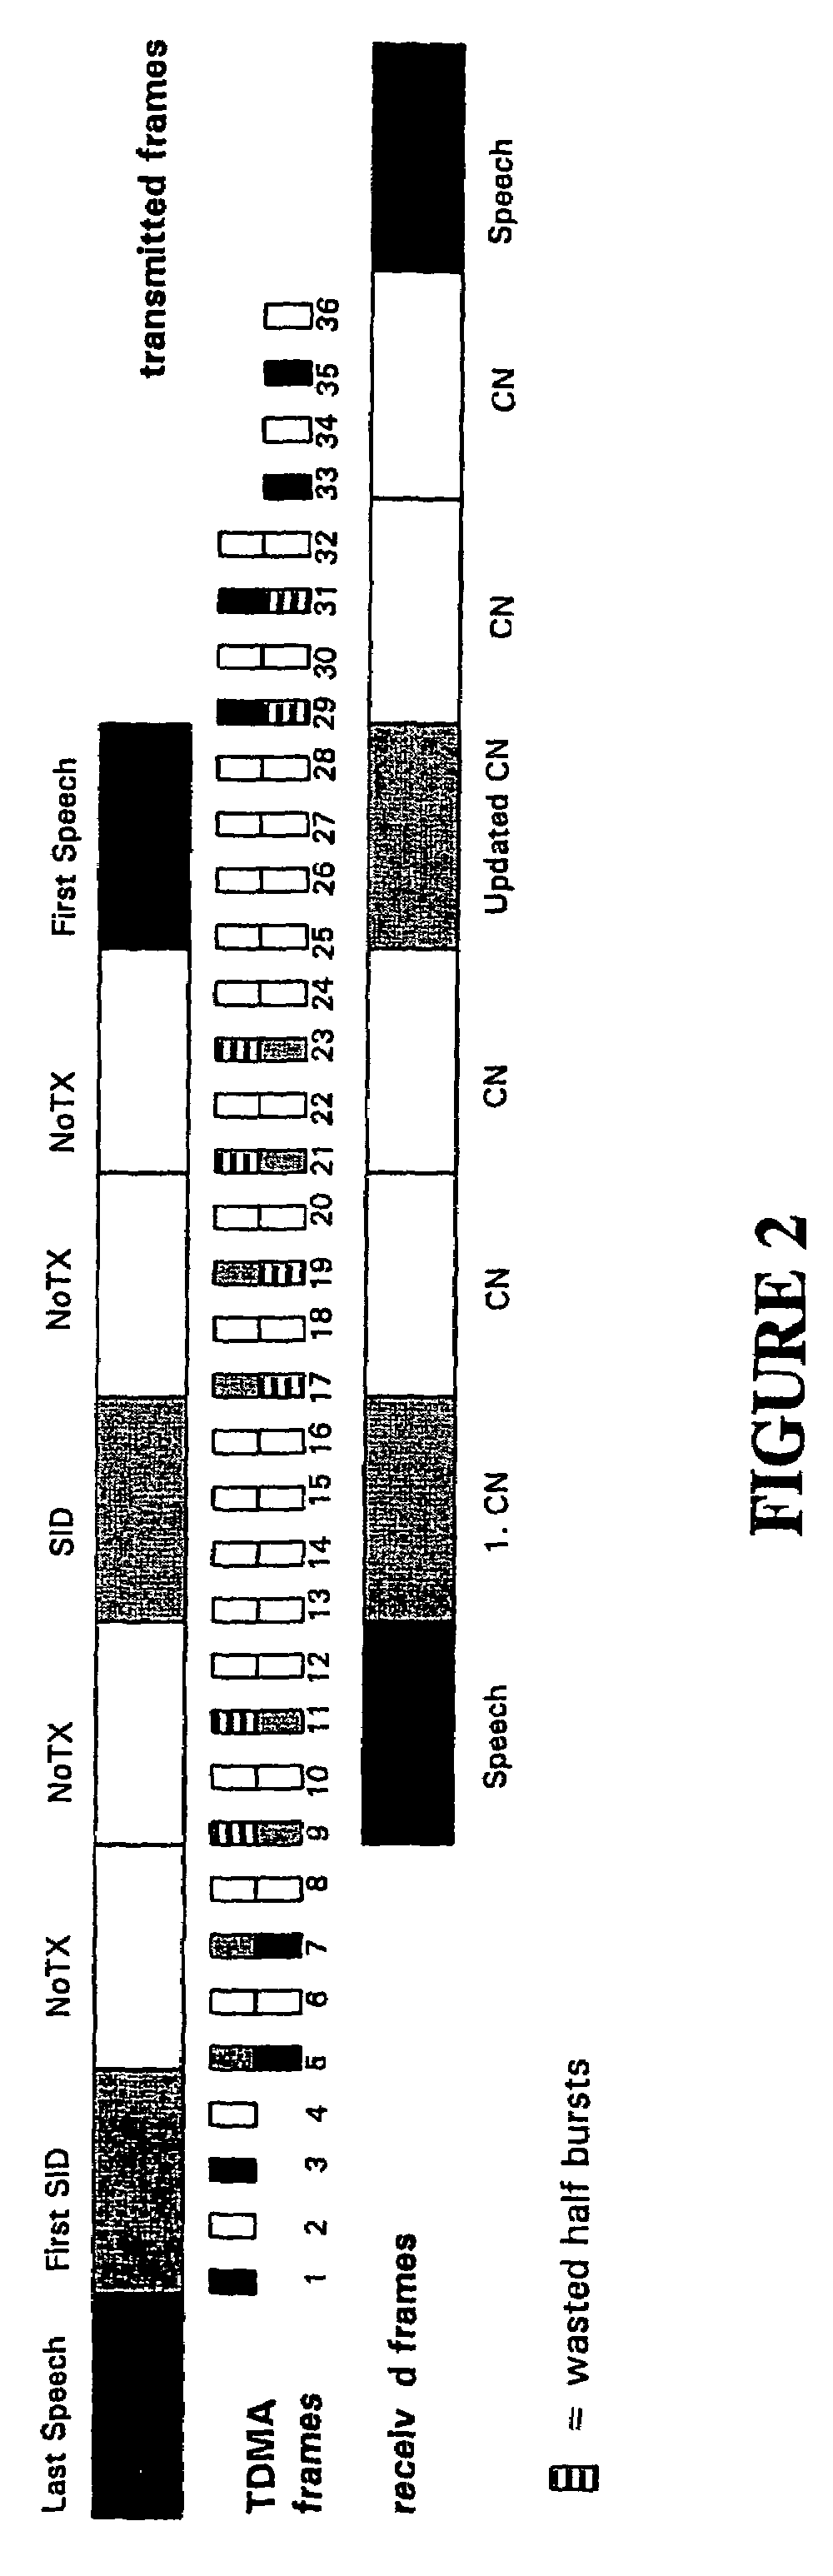 Efficient in-band signaling for discontinuous transmission and configuration changes in adaptive multi-rate communications systems